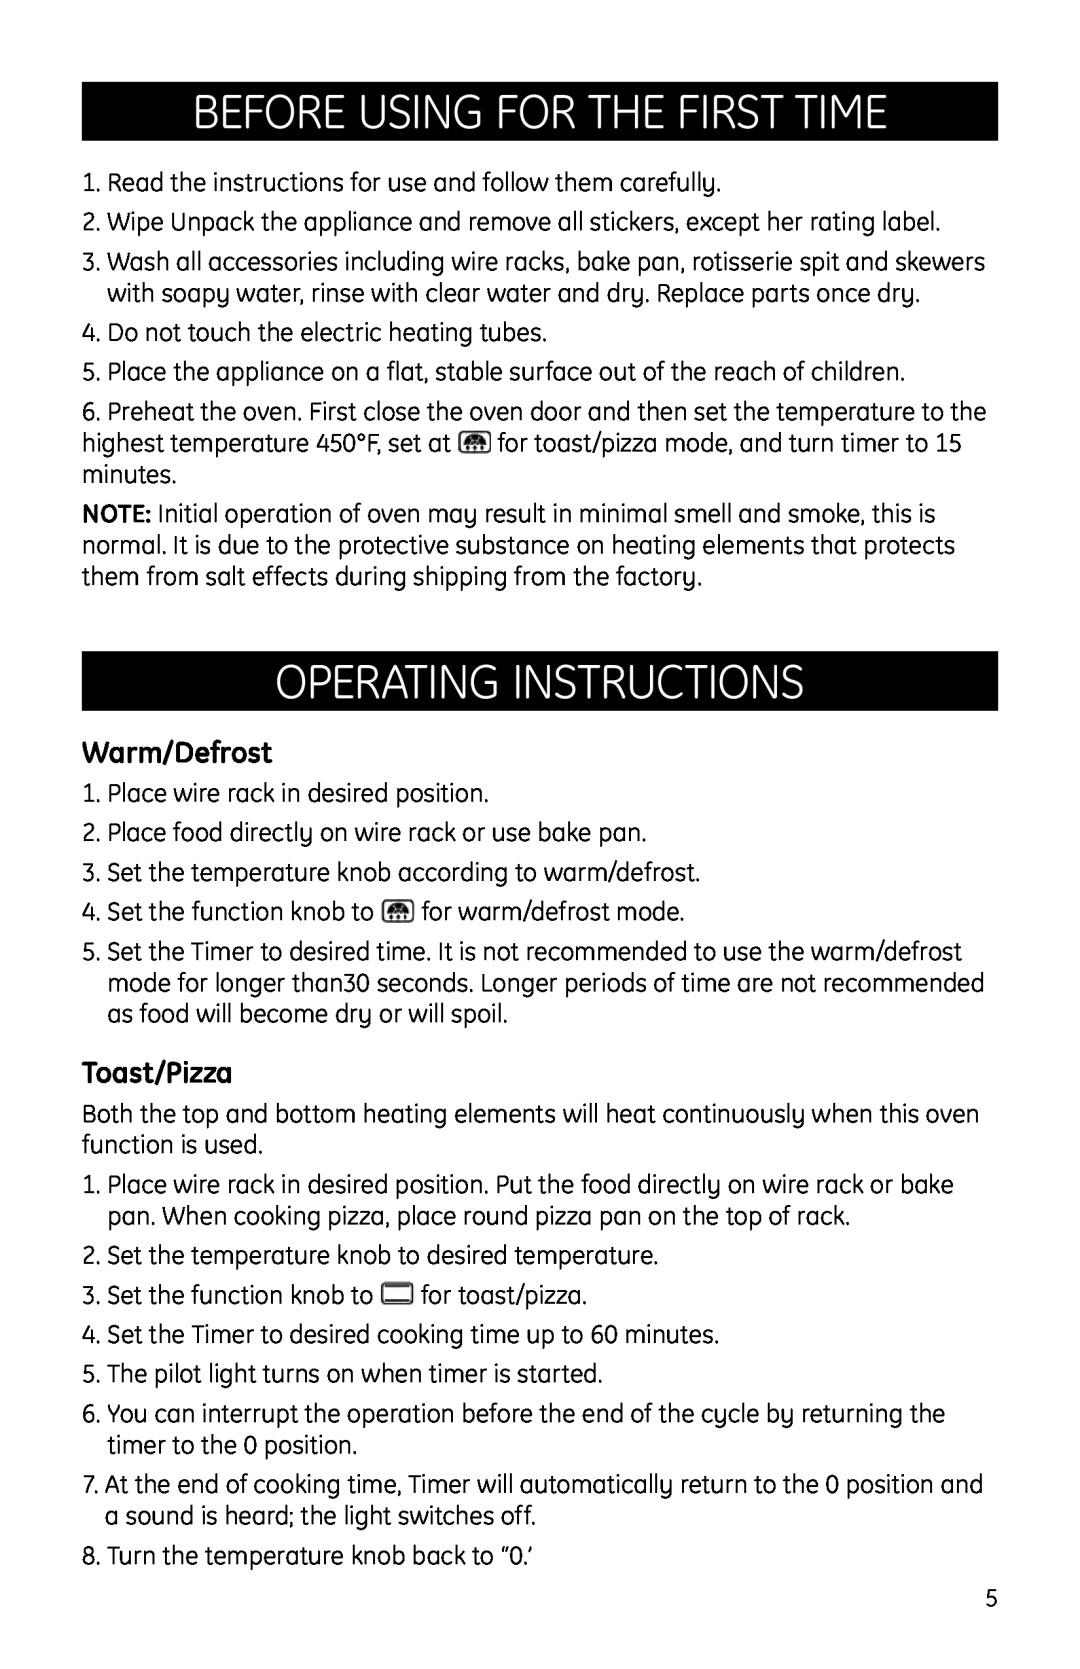 GE Countertop Oven manual before using for the first time, operating instructions, Warm/Defrost, Toast/Pizza 